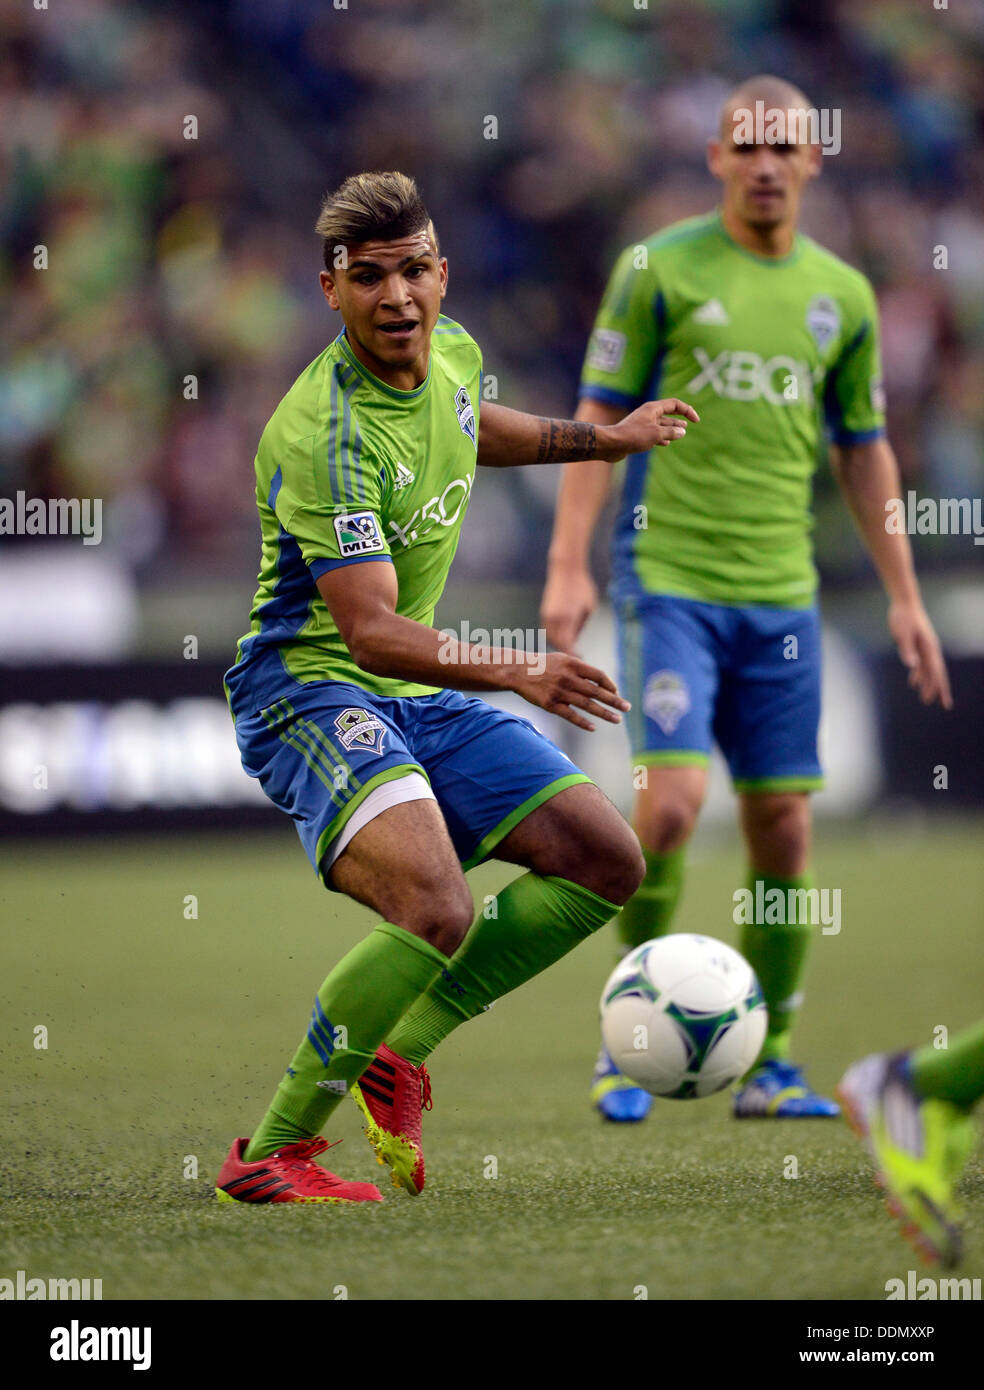 Seattle, Washington, USA. 04th Sep, 2013. Seattle Sounders FC defender DeAndre Yedlin #17 in action against Chivas USA at CenturyLink Field in Seattle, WA. Seattle Sounders FC defeats Chivas USA 1 - 0 .George Holland / Cal Sport Media. Credit:  Cal Sport Media/Alamy Live News Stock Photo